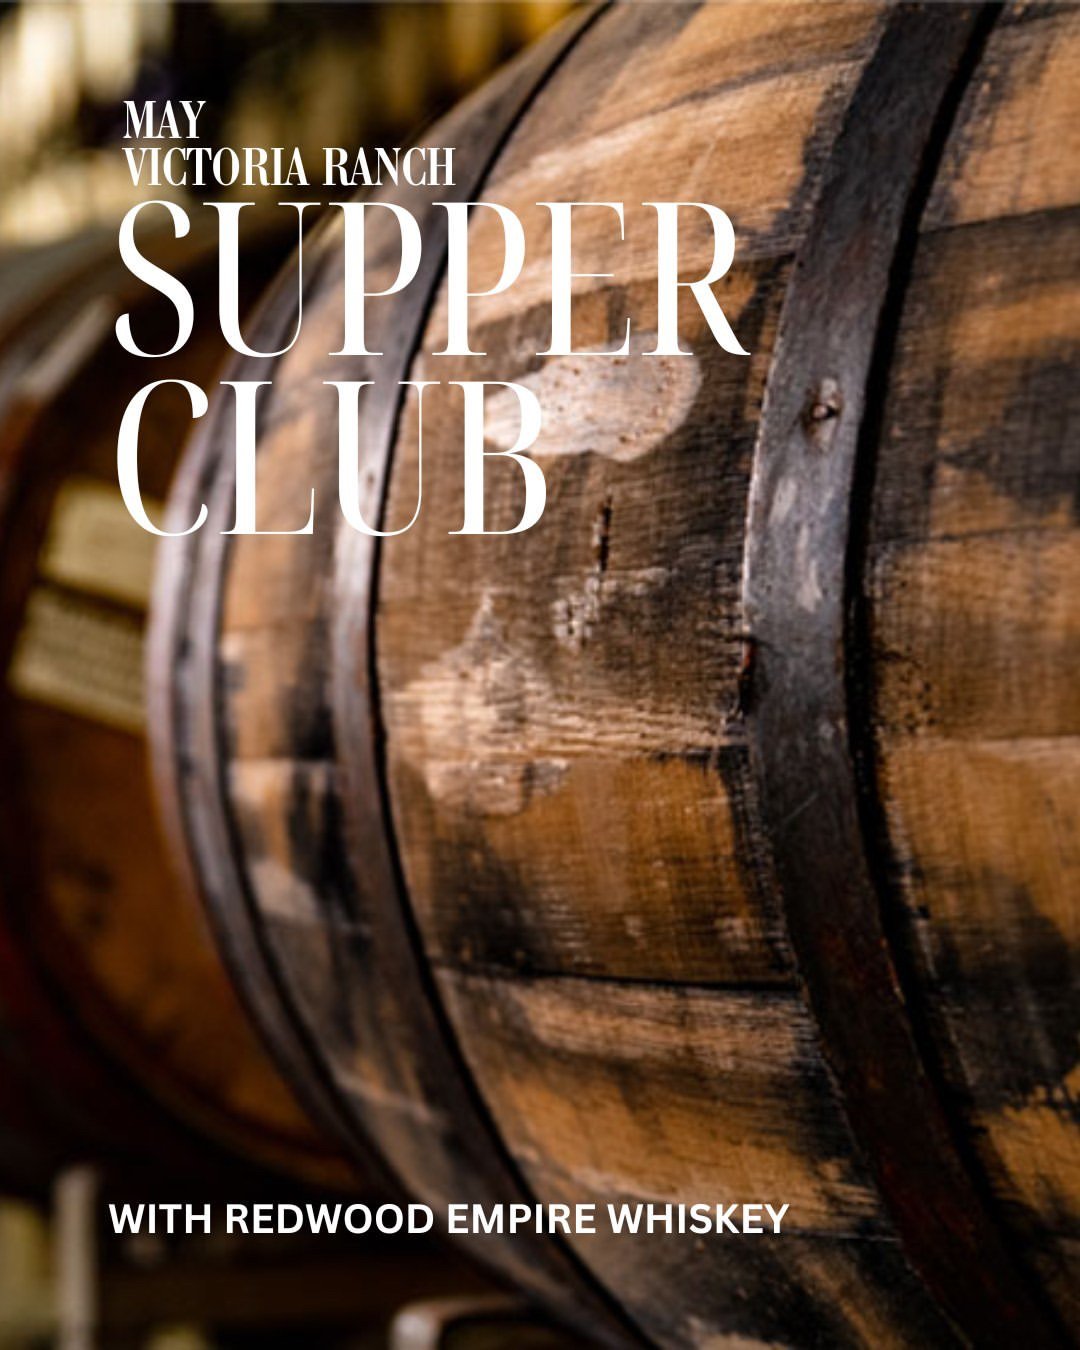 MAY SUPPER CLUB IS HERE! ⁠
⁠
Redwood Empire Whiskey Pairing Dinner with Chef Joann &amp; Co.⁠
Cocktail hour, 3-course plated dinner and whiskey pairings.⁠
⁠
Dine with us on May 14th for an evening of sublime craft whiskey by Redwood Empire Whiskey an